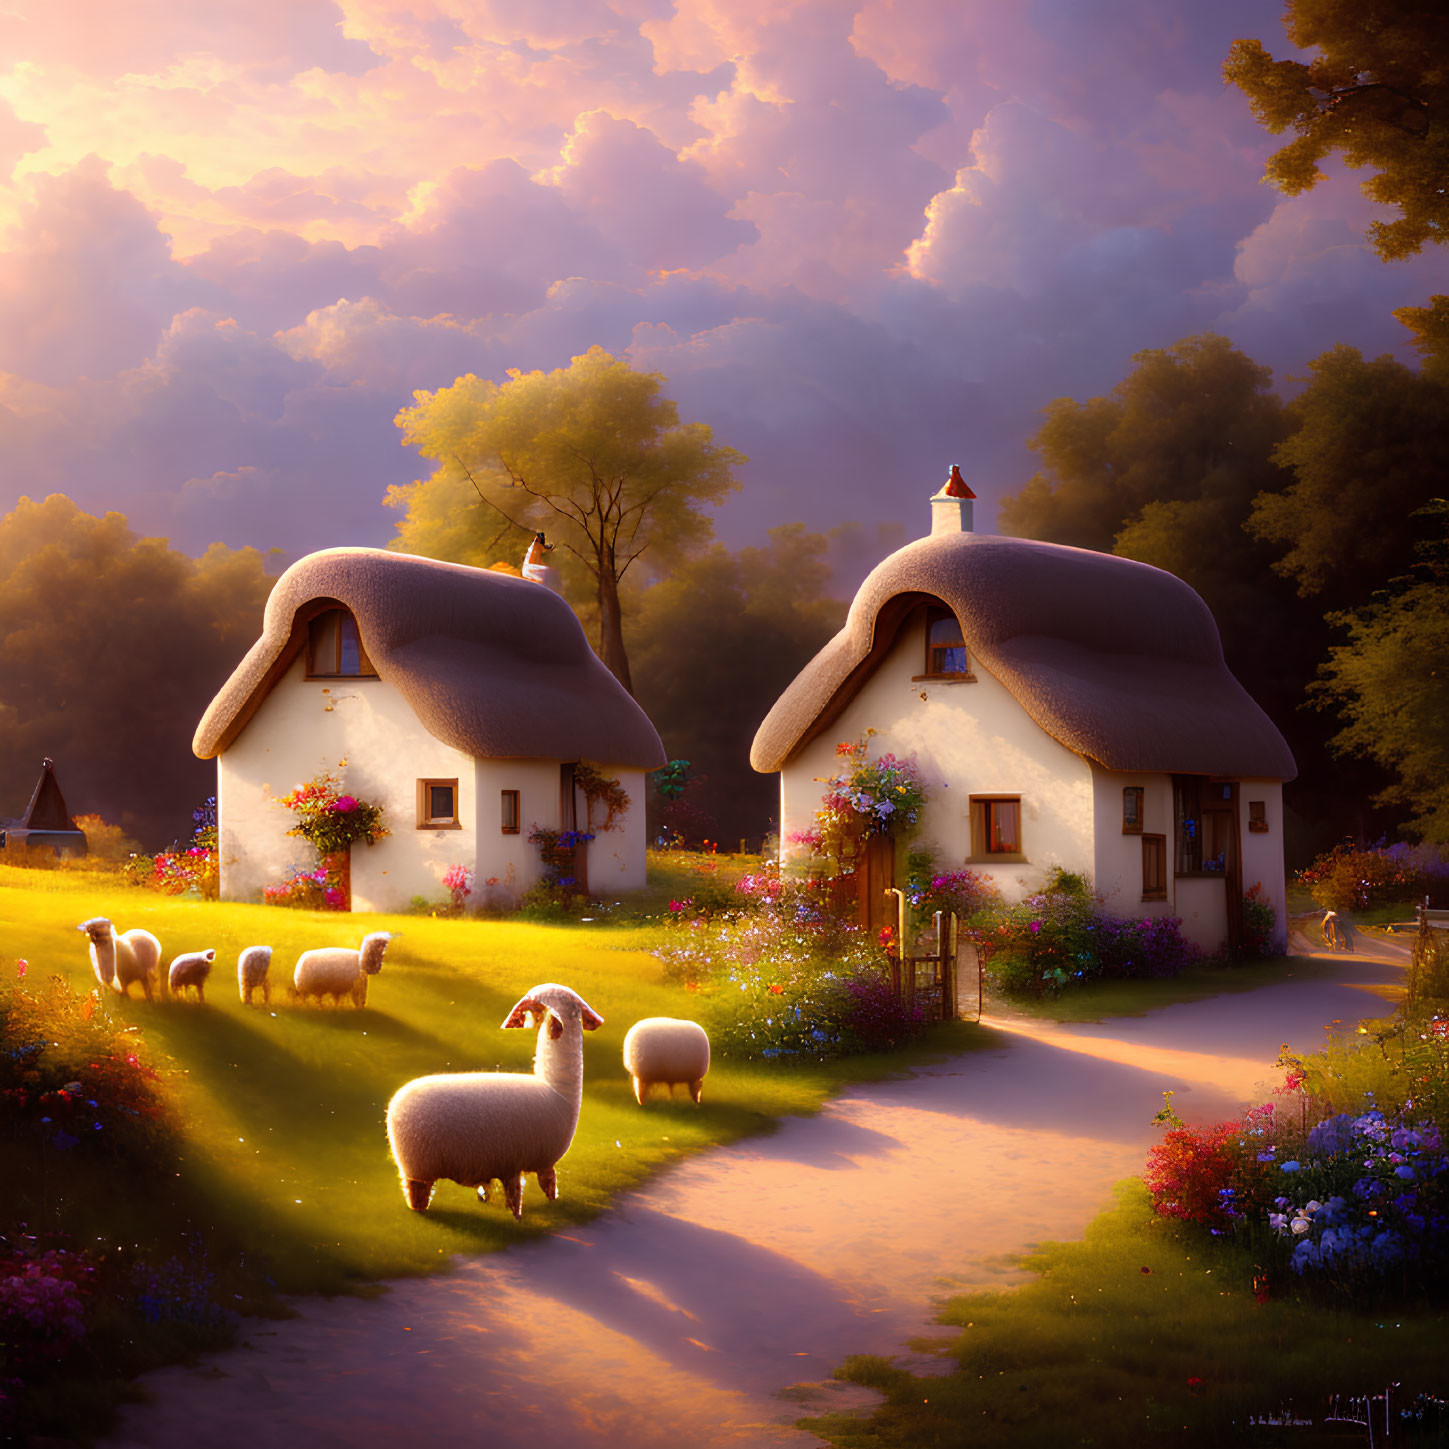 Rural scene: Thatched-roof cottages, sheep, and vibrant flowers at sunset